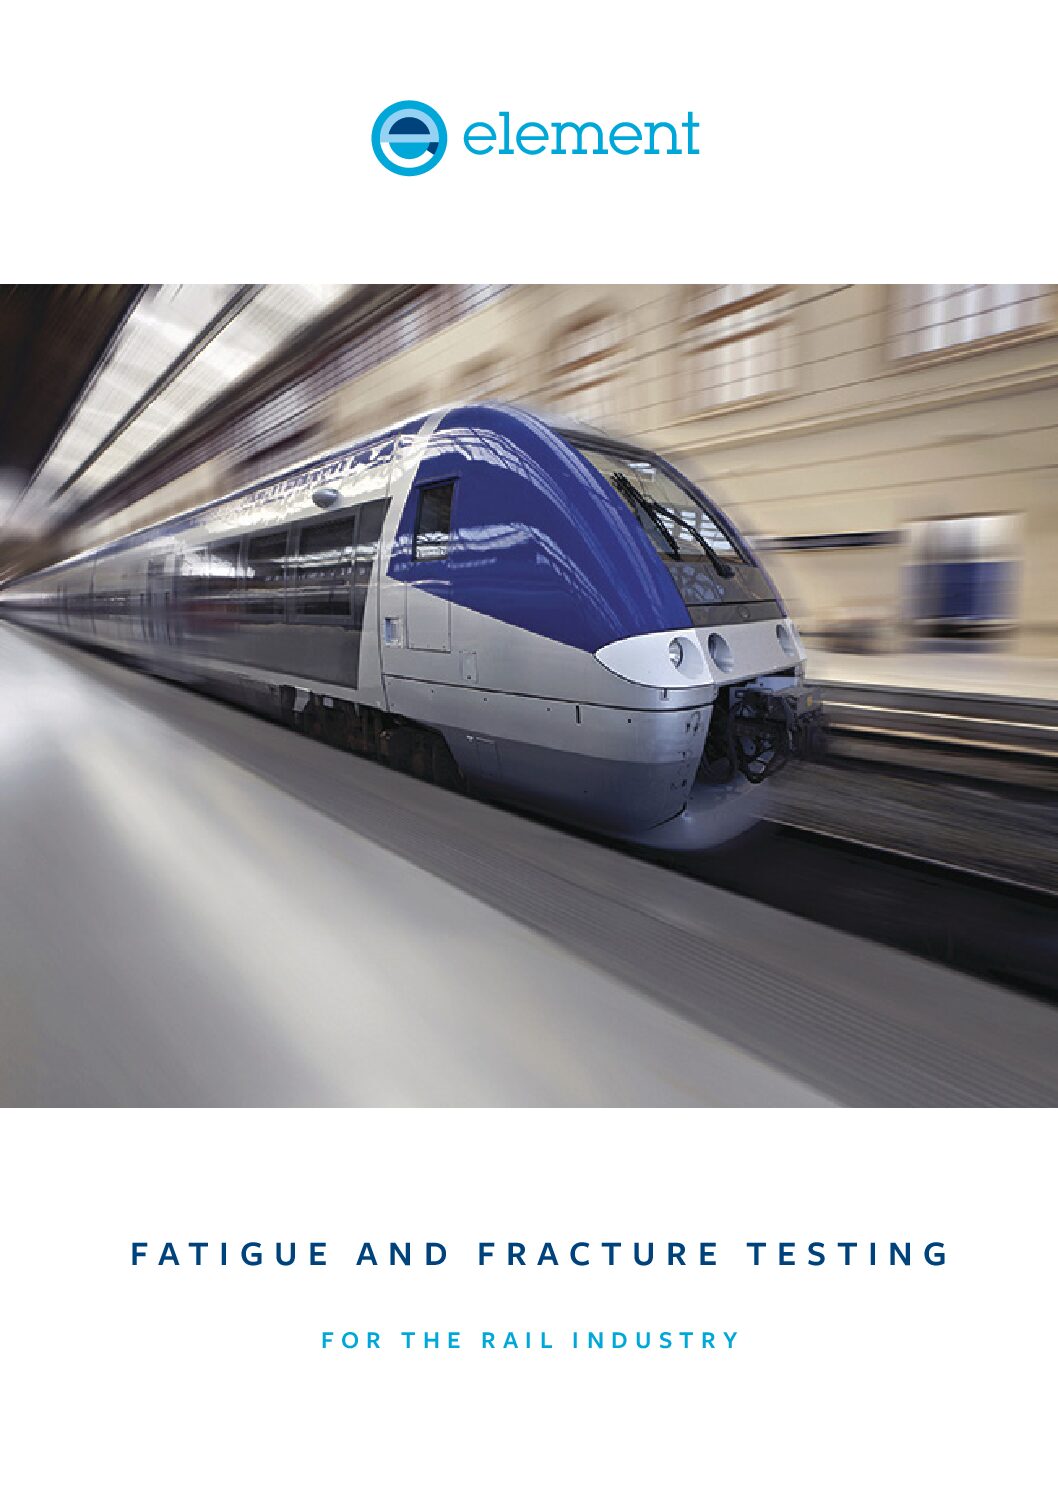 Element Materials Technology | Fatigue and Fracture Testing